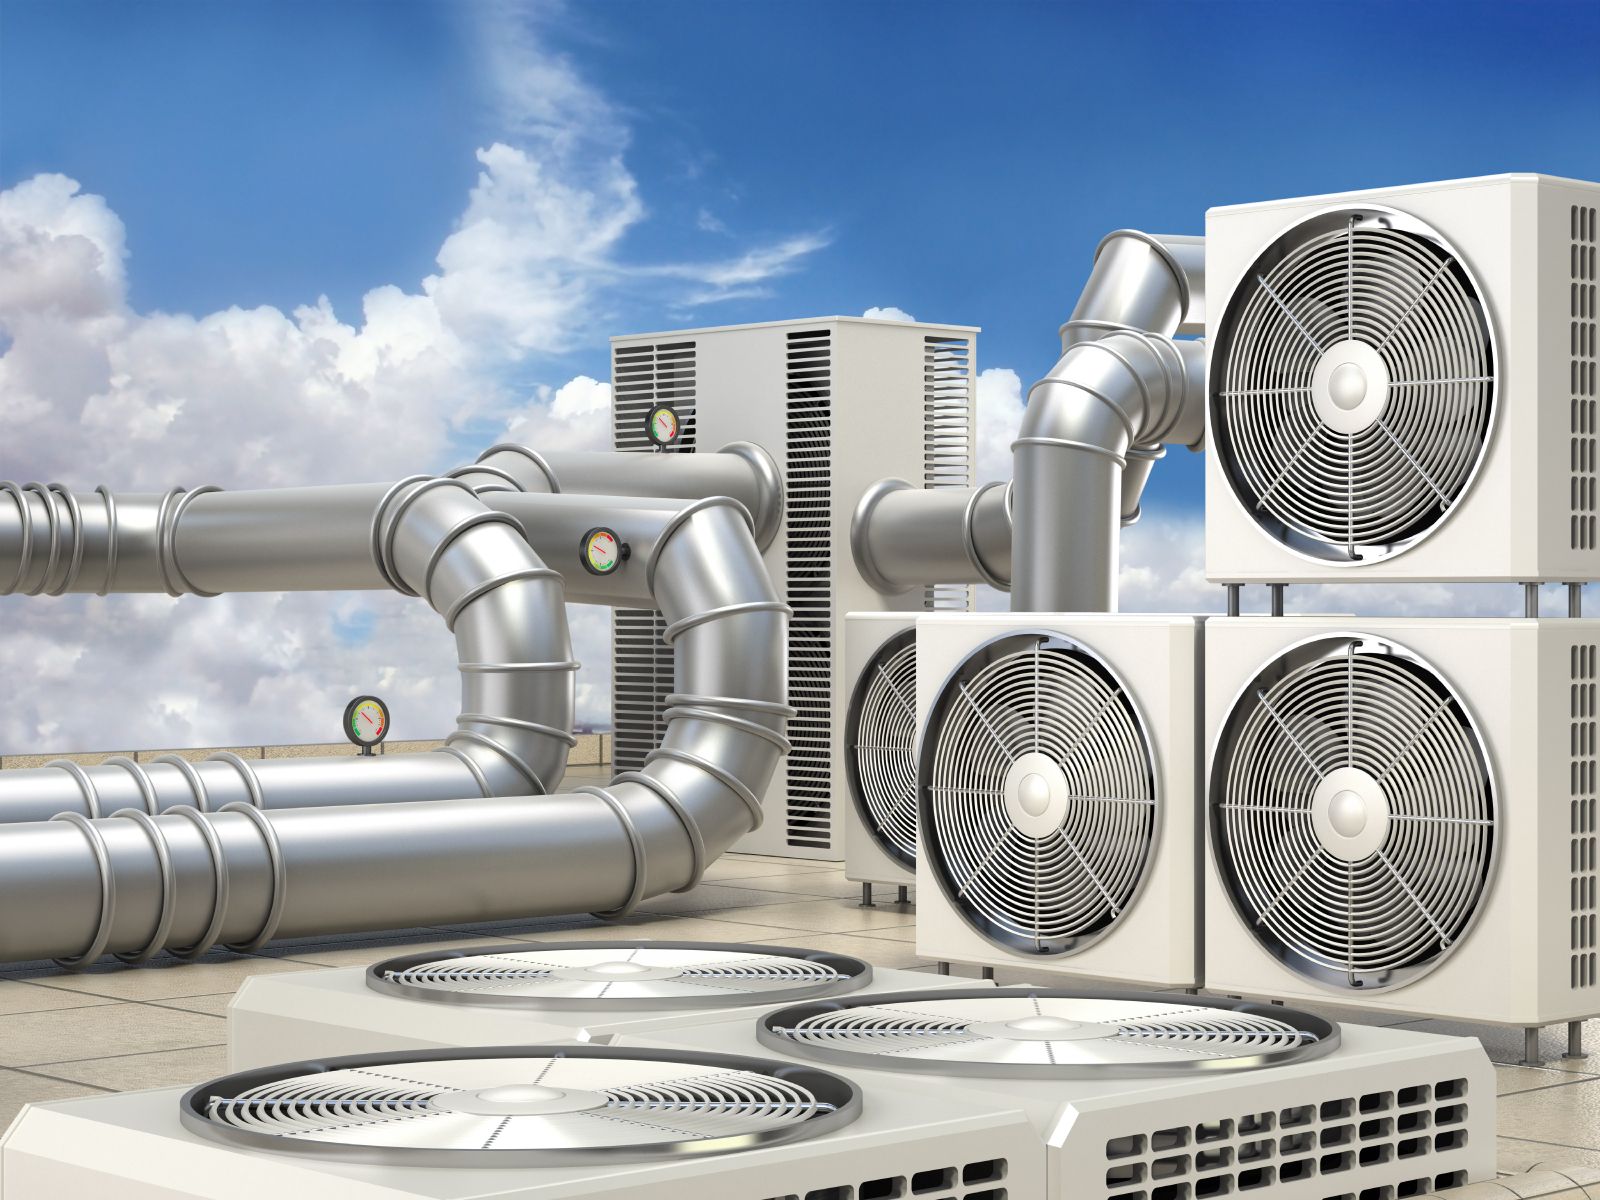 Image Of Hvac Equipment Ventilation And Air Conditioning